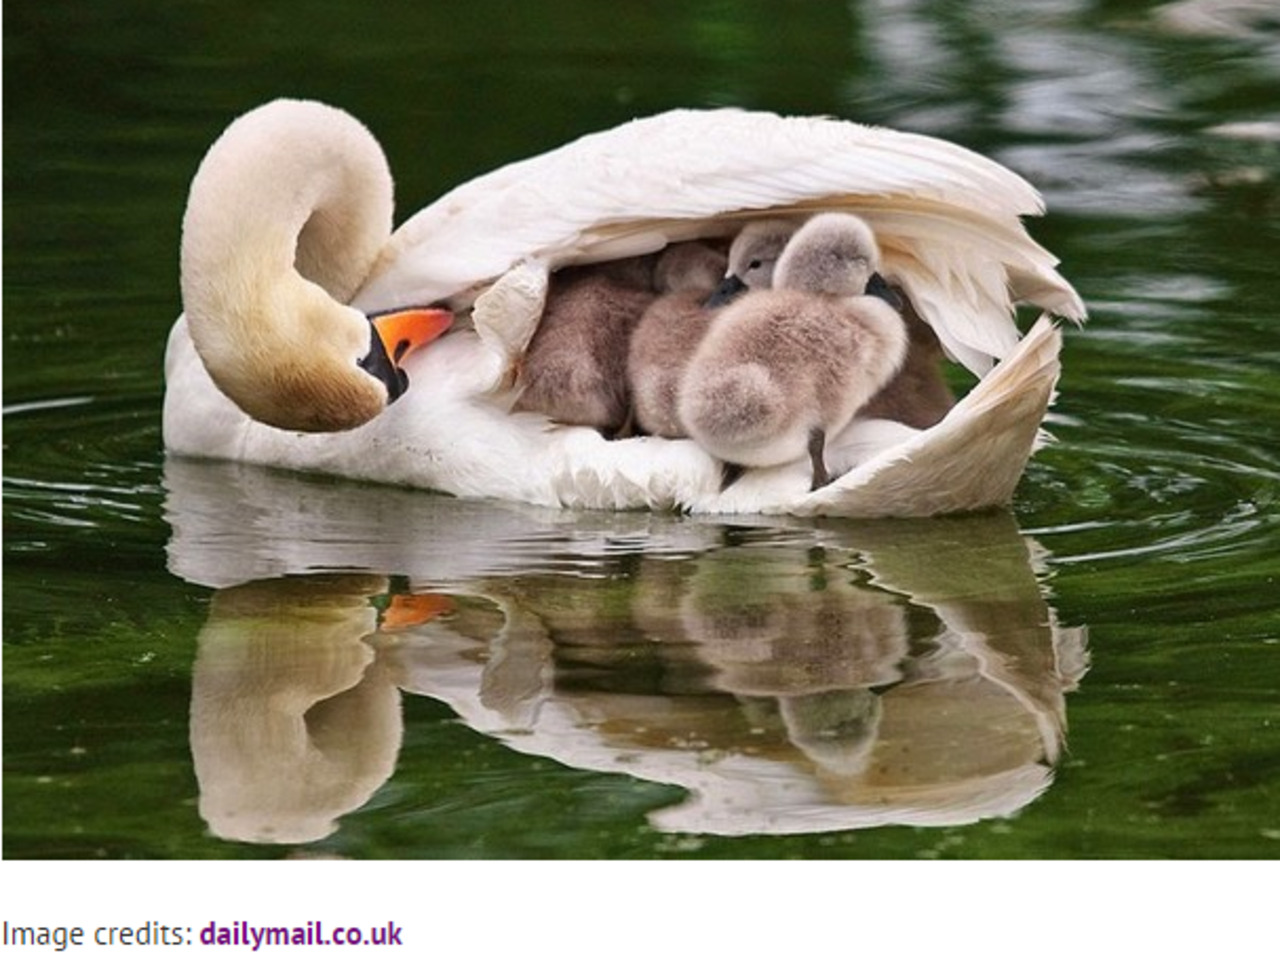 25 of the cutest parenting moments in the animal kingdom: http://bit.ly/1Cw2Bmp via @AlteringMinds #birds http://t.co/u0LjeGYLxH